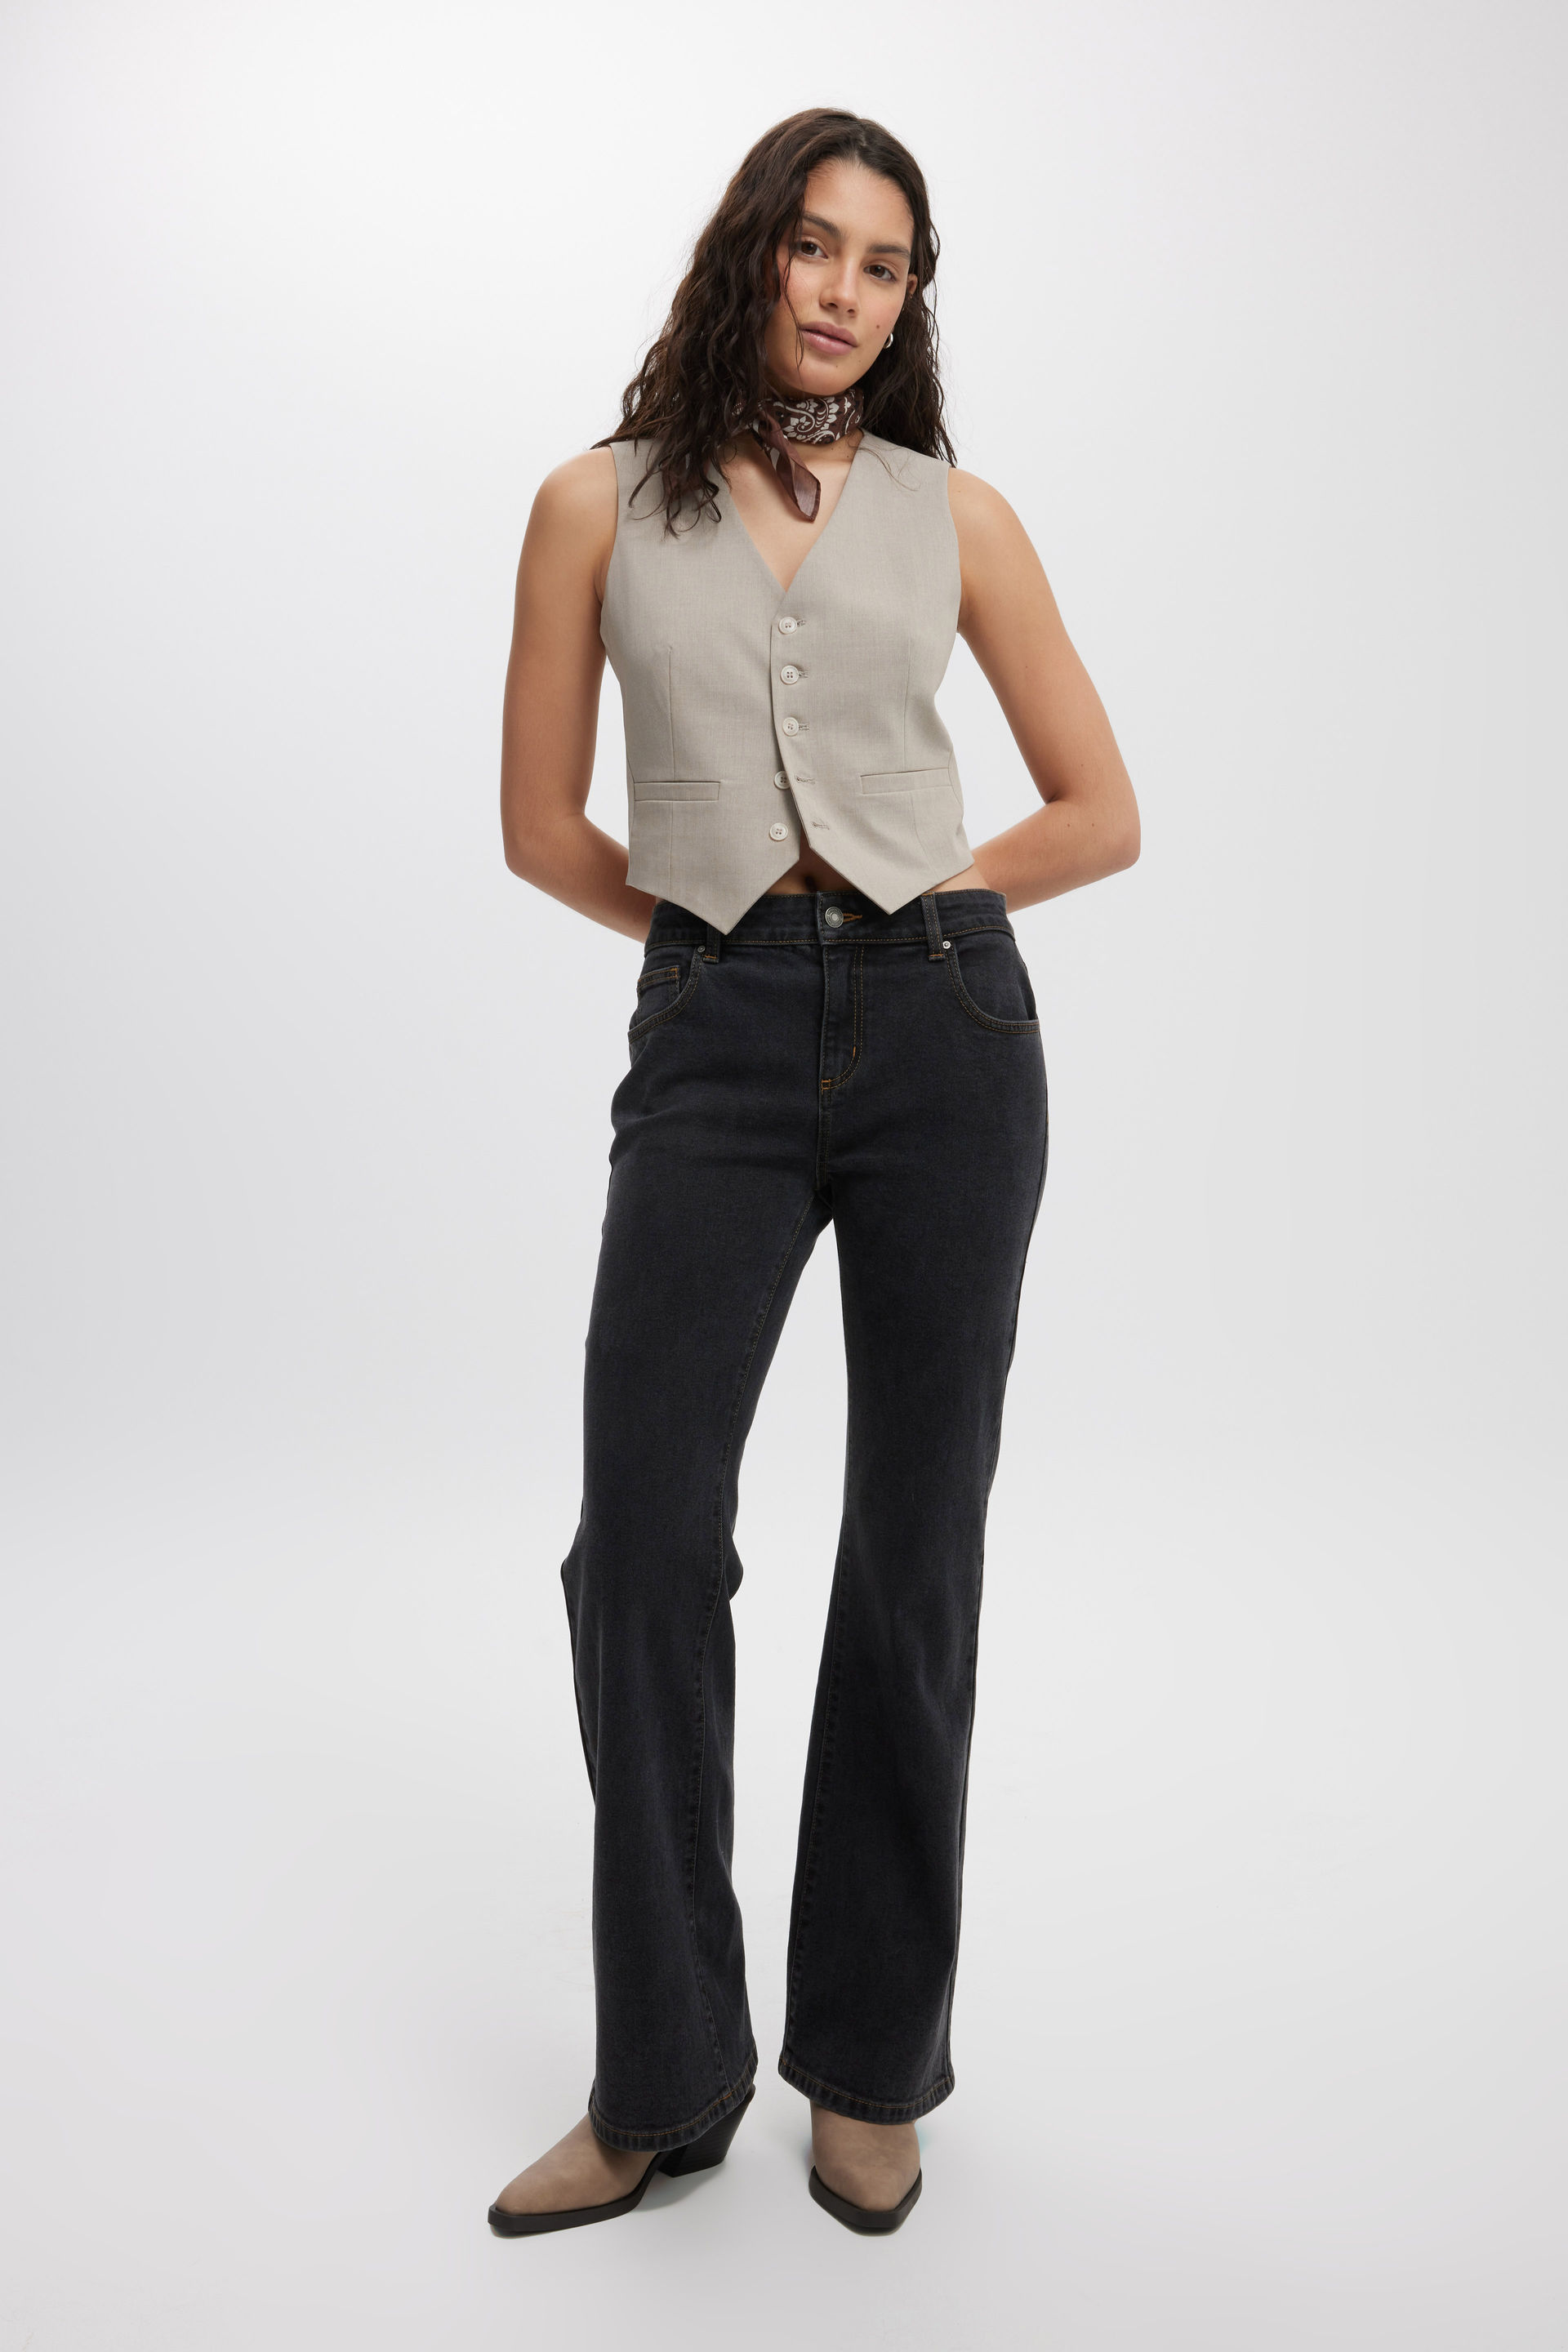 COTTON ON Women's Stretch Bootleg Flare Jeans - Macy's